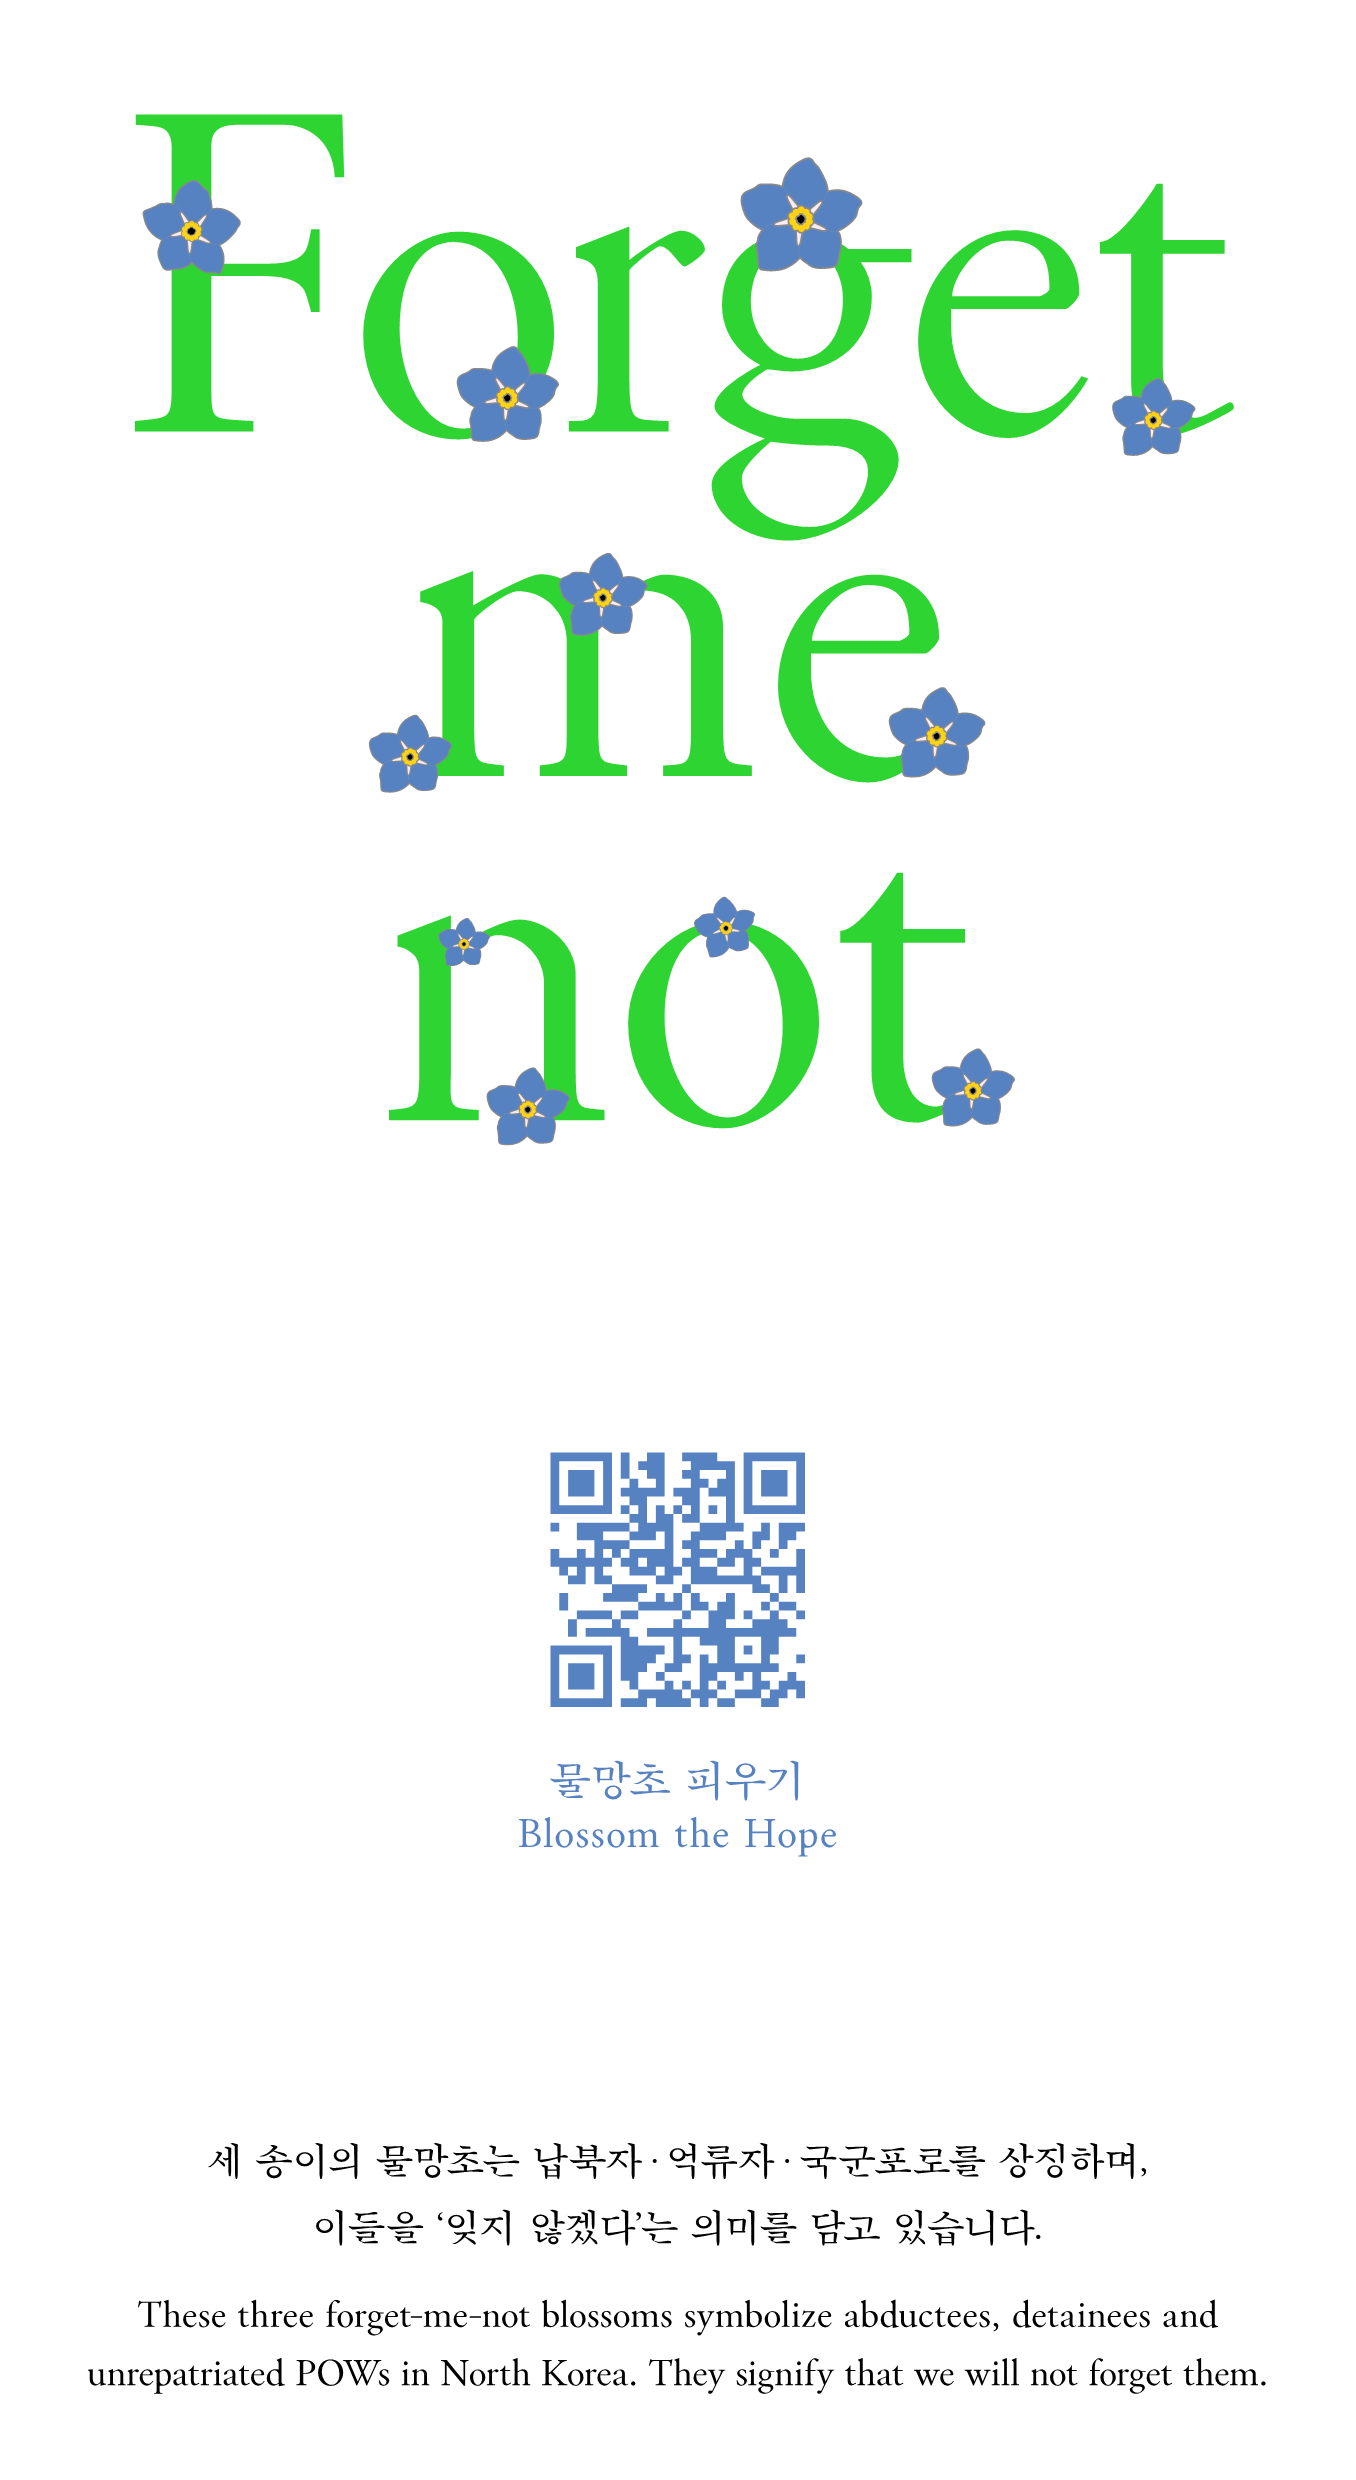 Forget me not 물망초 피우기 물망초 피우기 blossom the hope 새송이의 물망초는 납북자.억류자.국군포로를 상징하며, 이들을 잊지 않겠다는 의미를 담고 있습니다. These three forget-me-net blossoms symbolize abdcutees, dtainees and unrepatriated POWs in North Korea. They signify that we will not forget them.